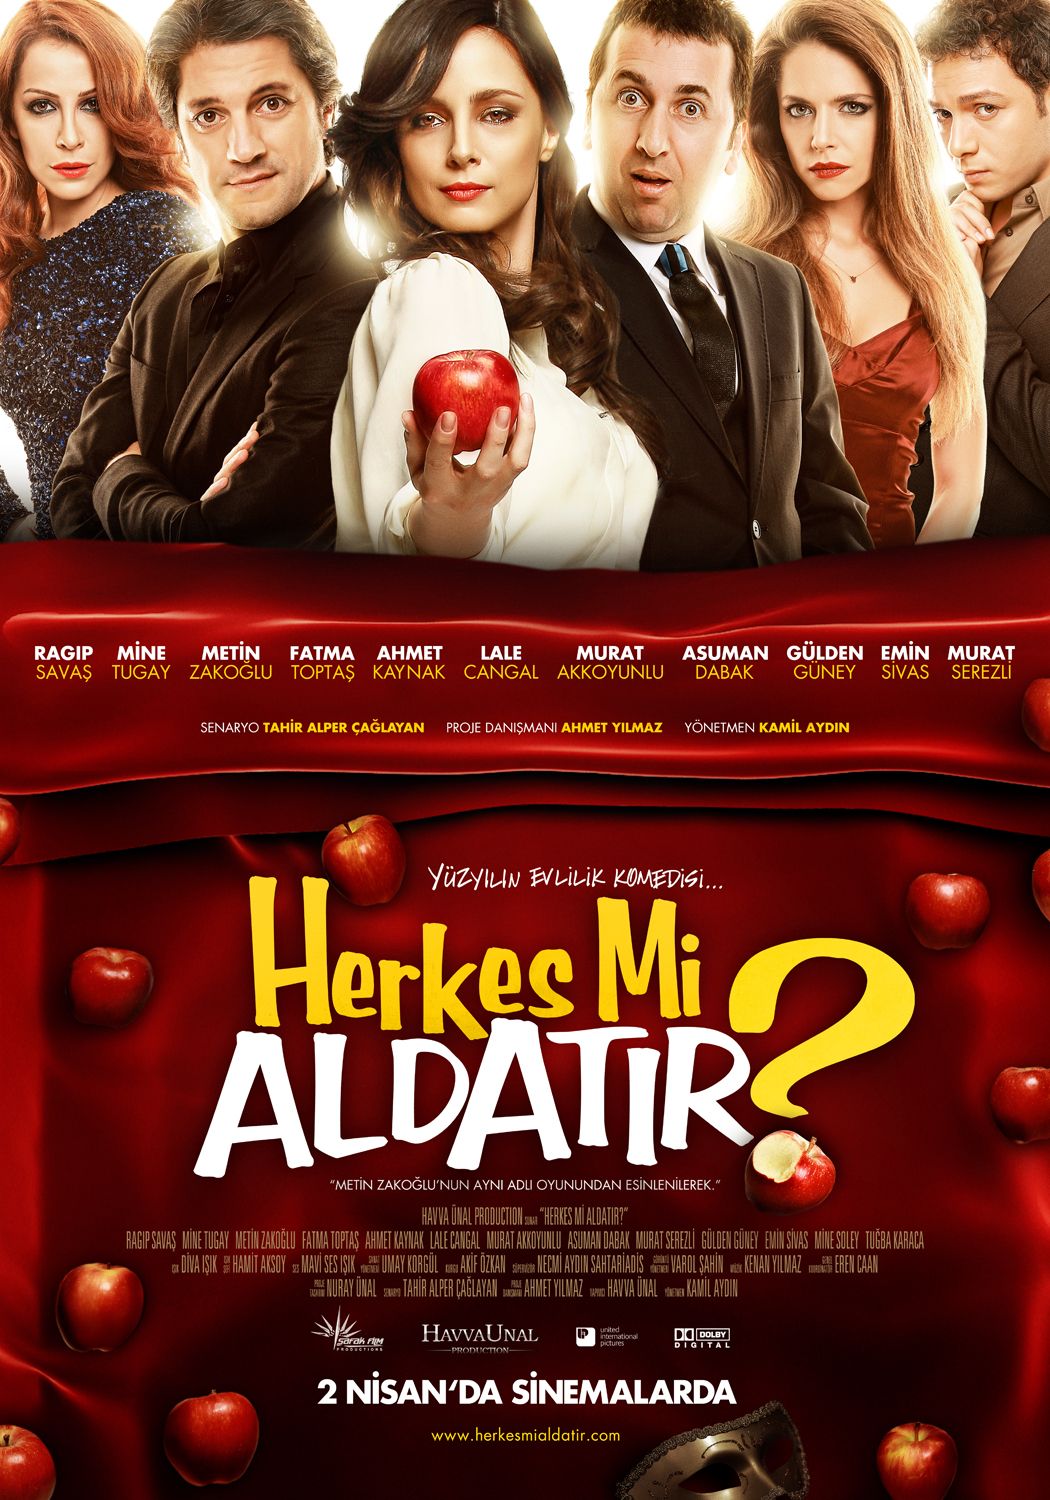 Extra Large Movie Poster Image for Herkes mi Aldat?r? (#2 of 3)